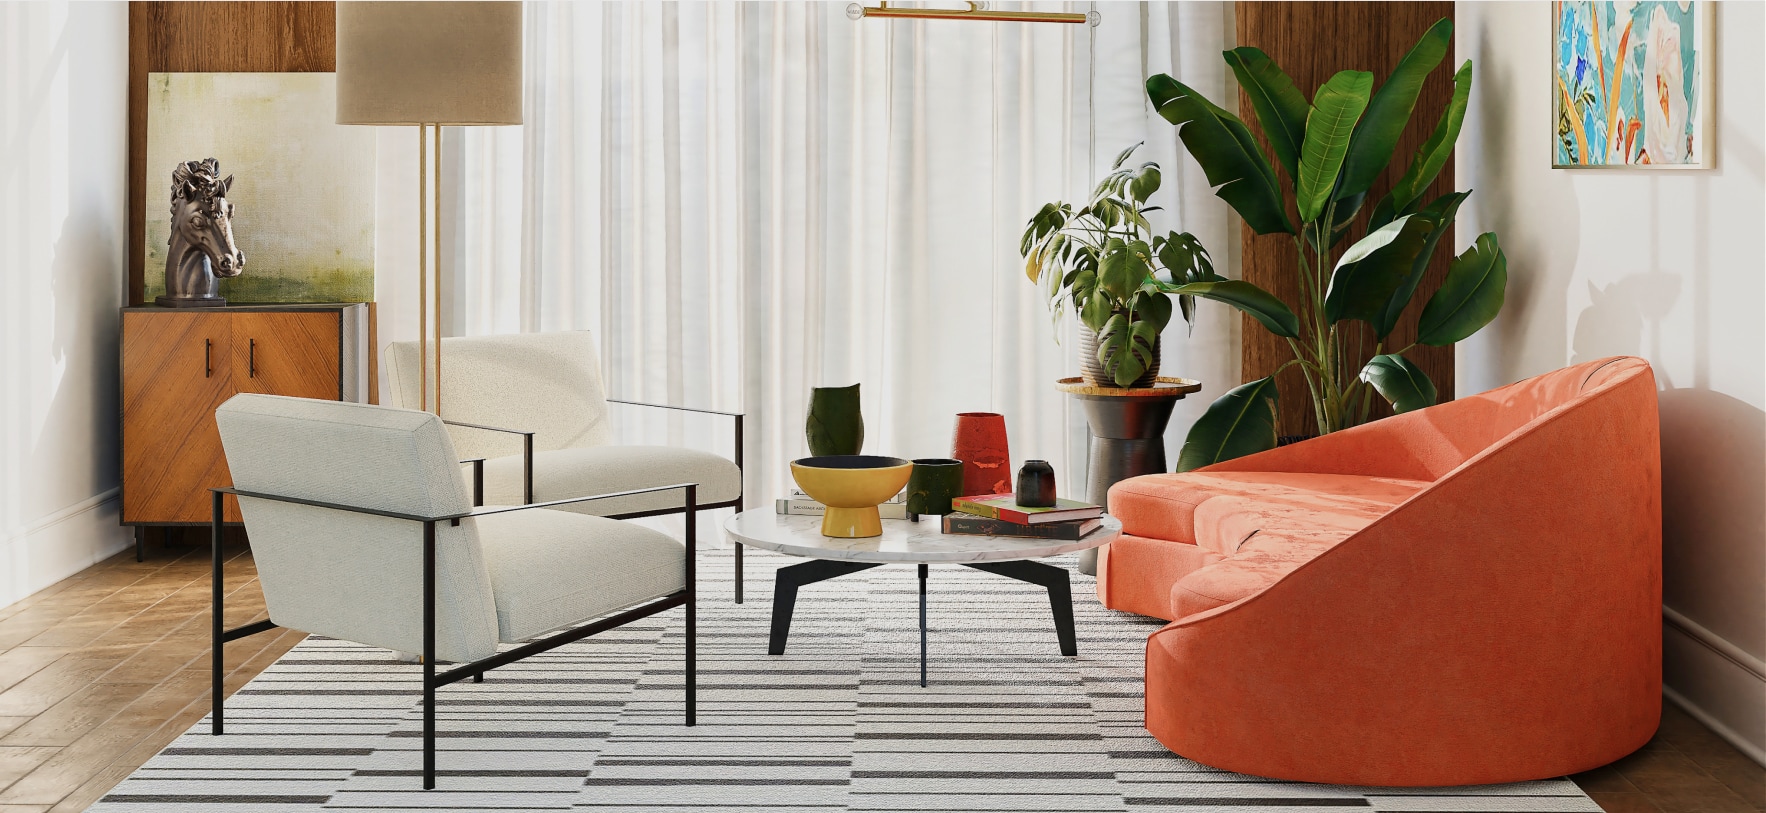 living room with white chairs and an orange chaise lounge